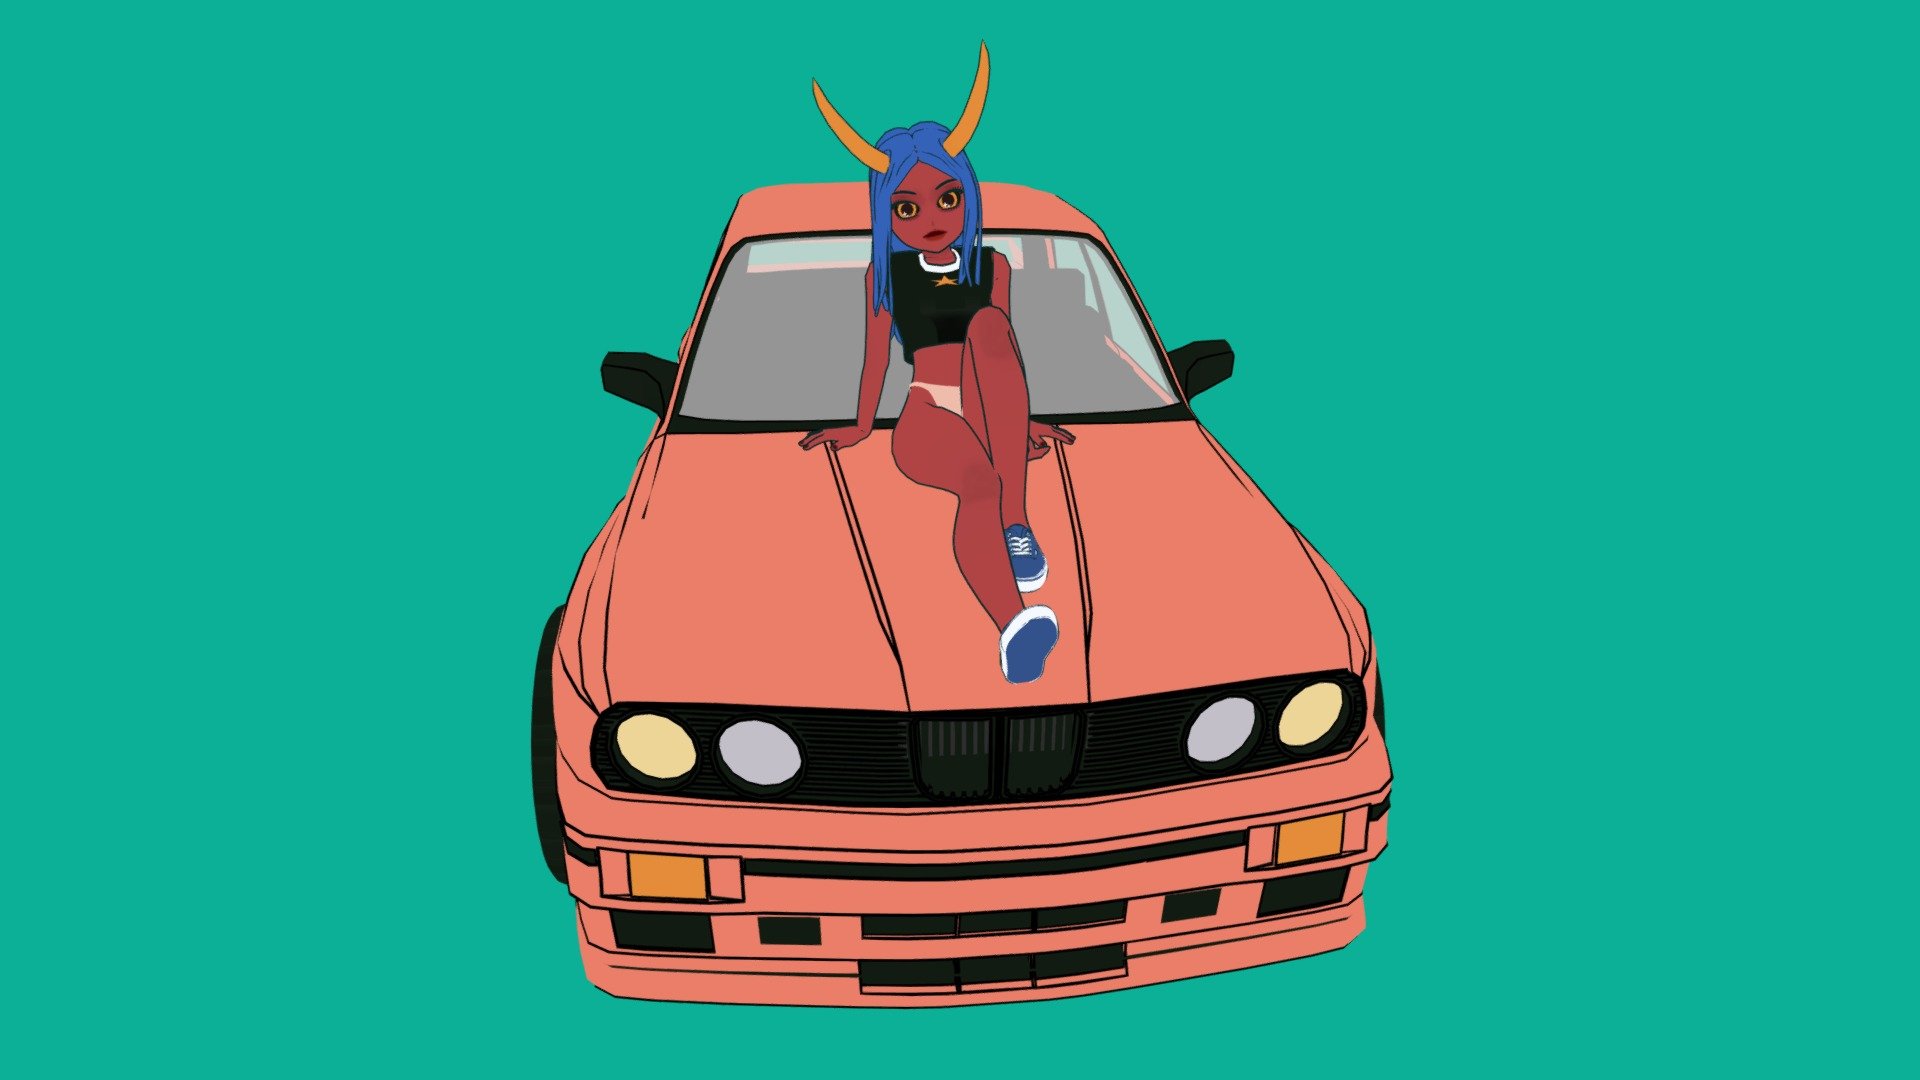 some more progress :)

car model was made by @Lexyc16 - demon girl chiling on her E3 - Download Free 3D model by Jesus aponza (@Jesusaponza) 3d model